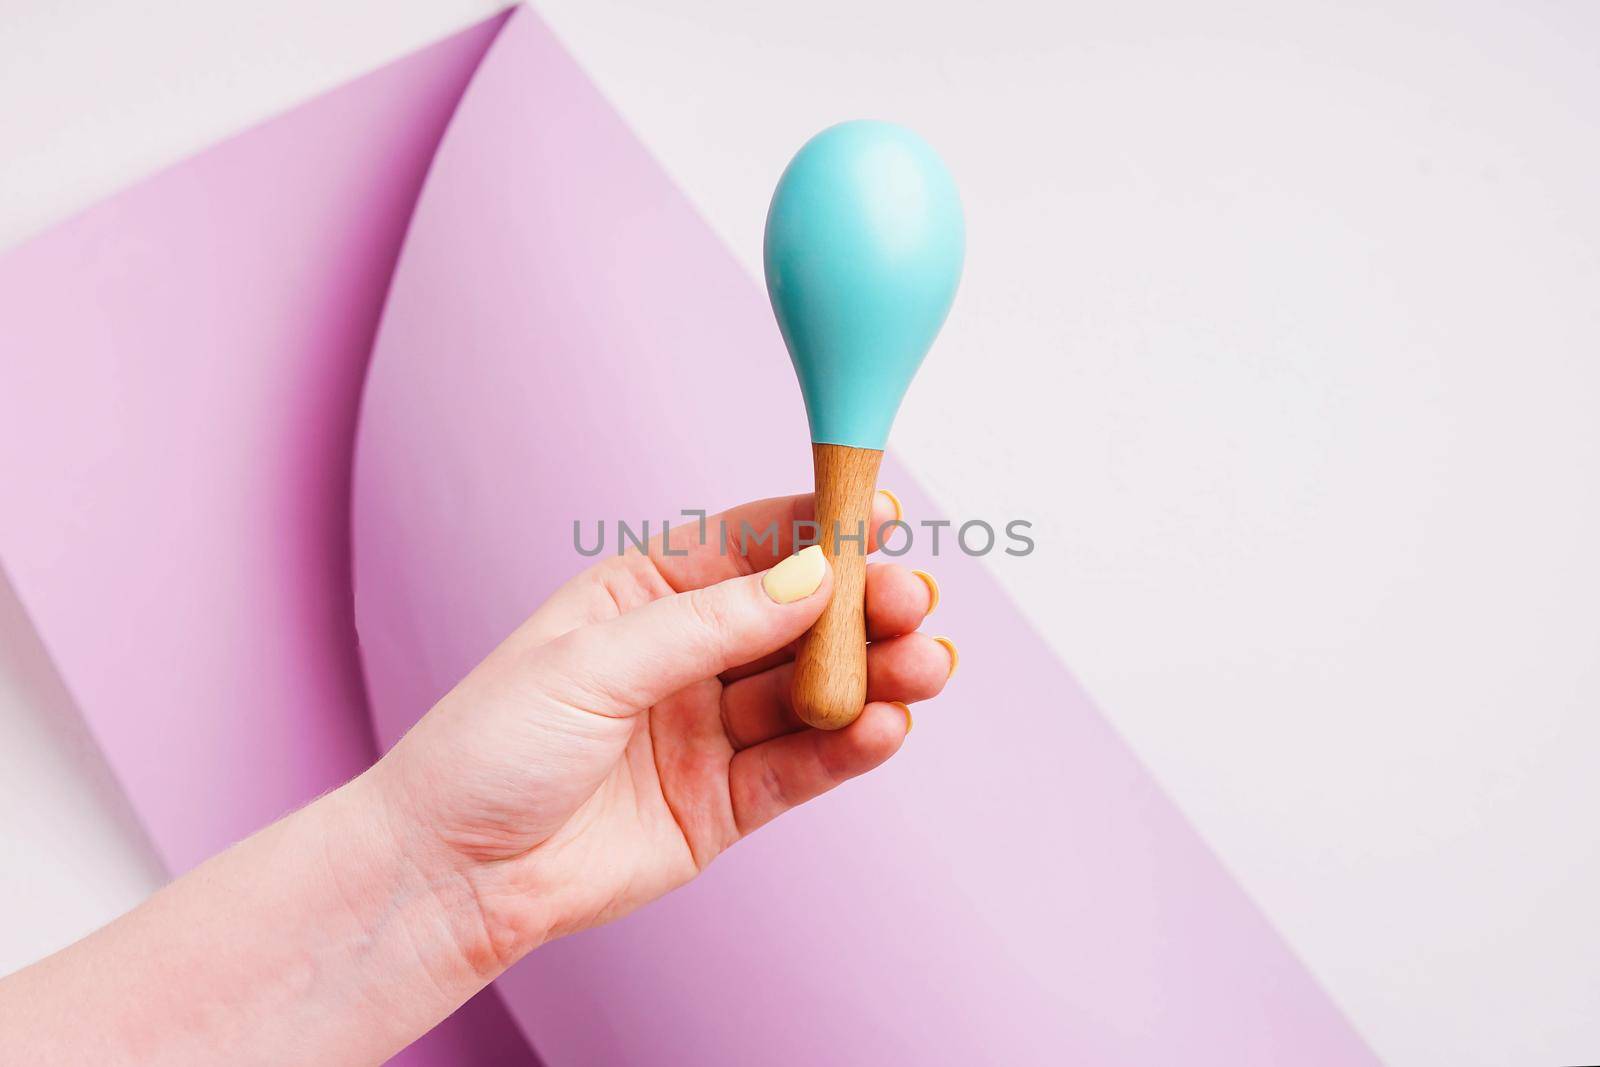 Baby maracas in hand with yellow manicure. Bright wooden rattles for kids. Toys made of natural wood.